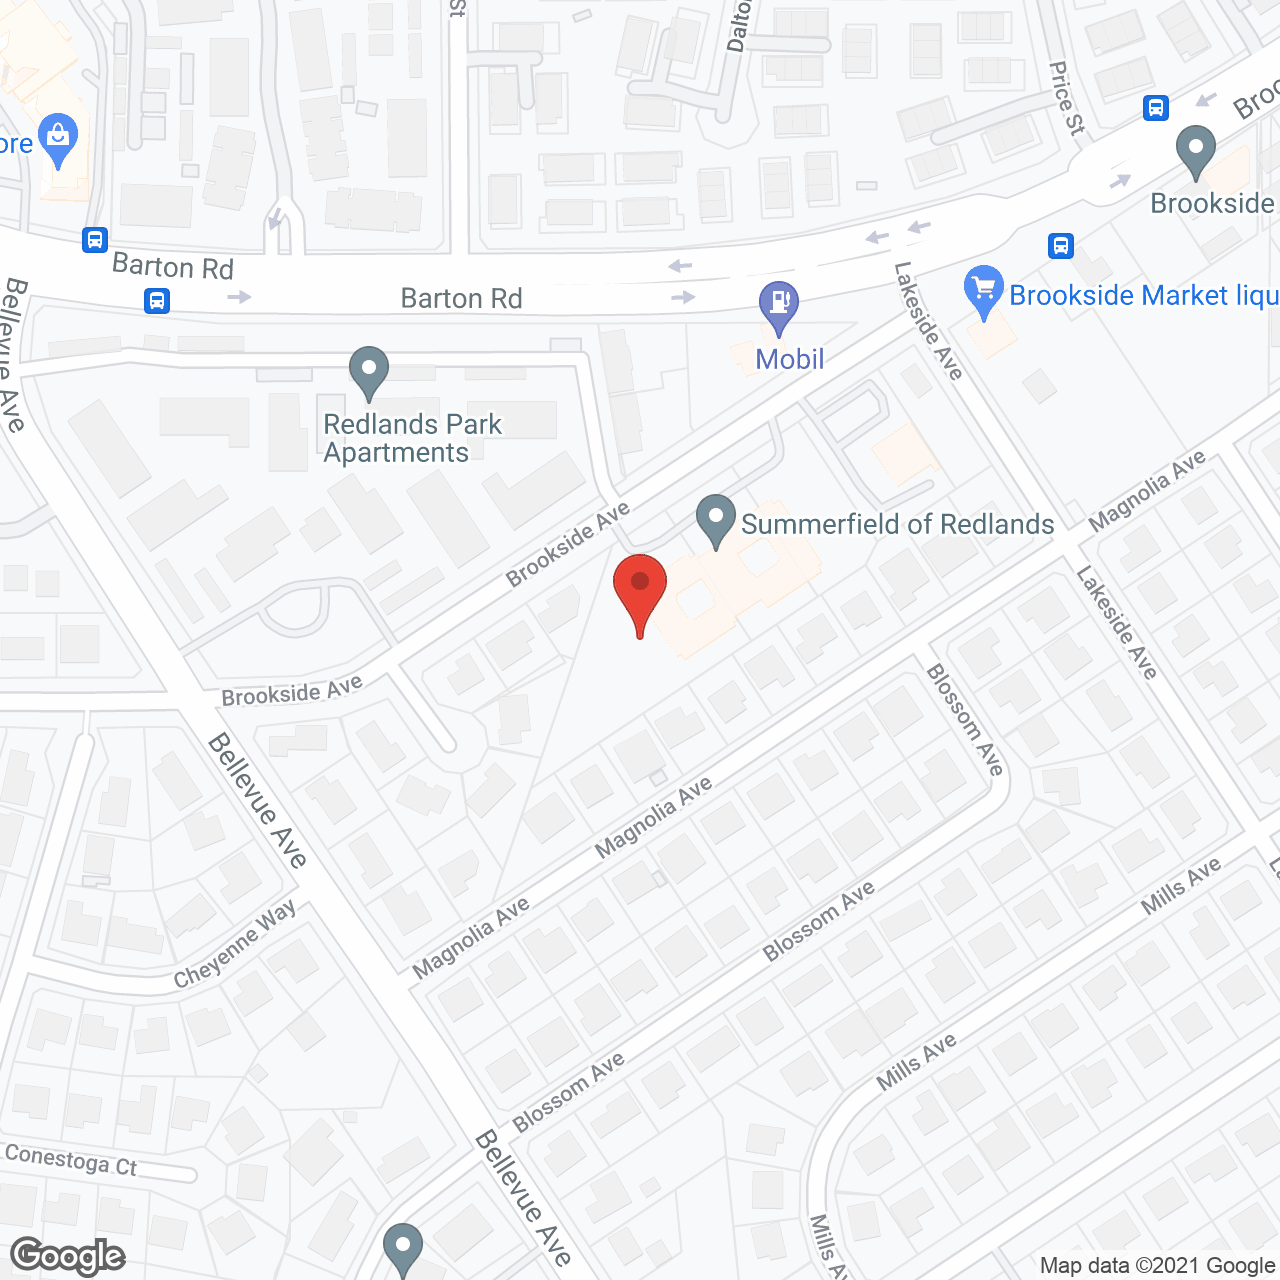 Summerfield of Redlands Memory Care in google map